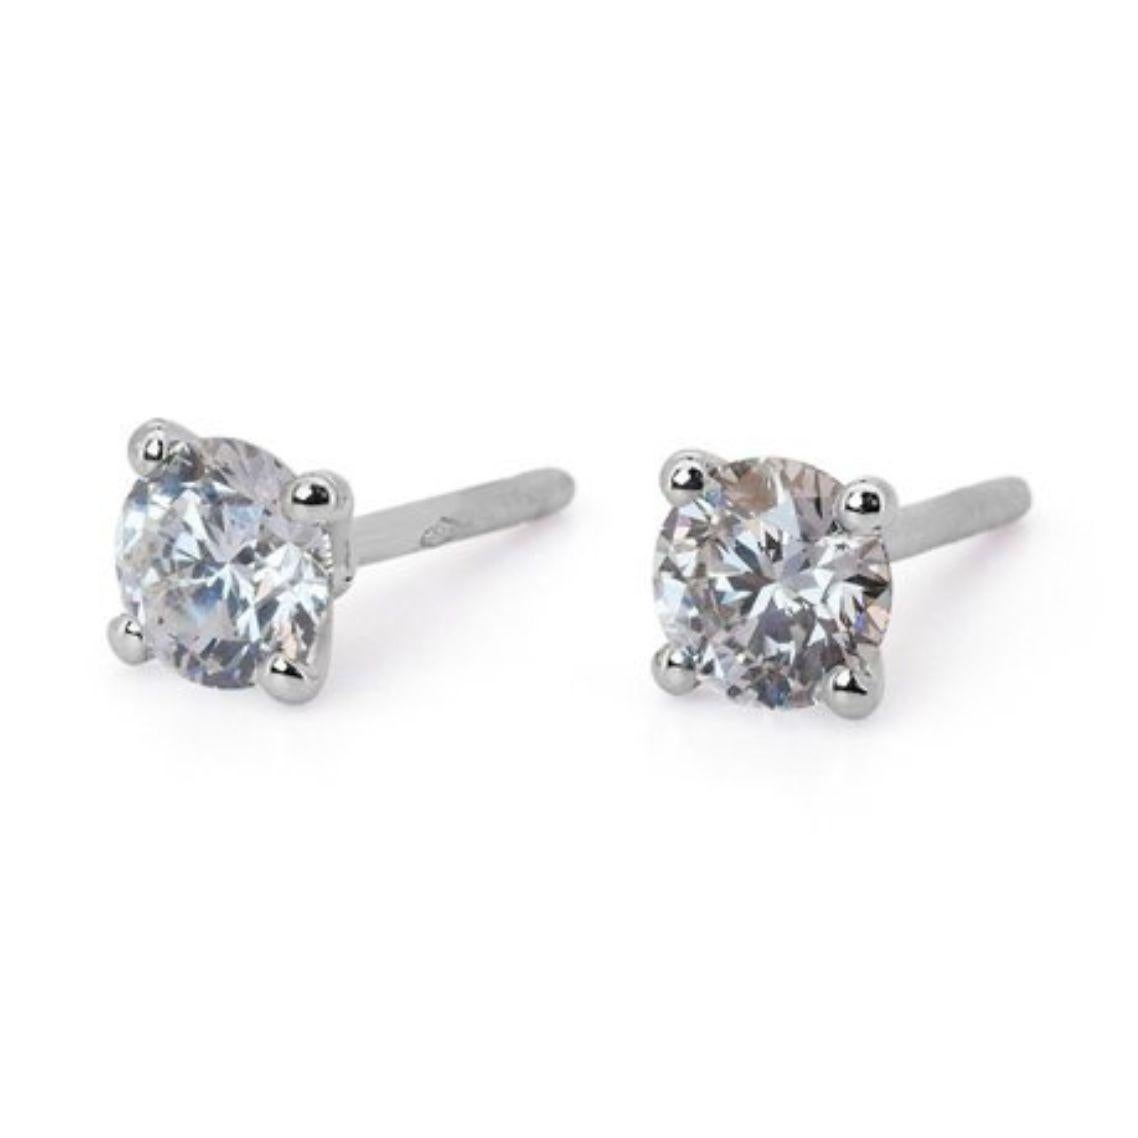 Round Cut Captivating 1.8 Carat F Color VVS1 Diamond Studs in 18K White Gold For Sale